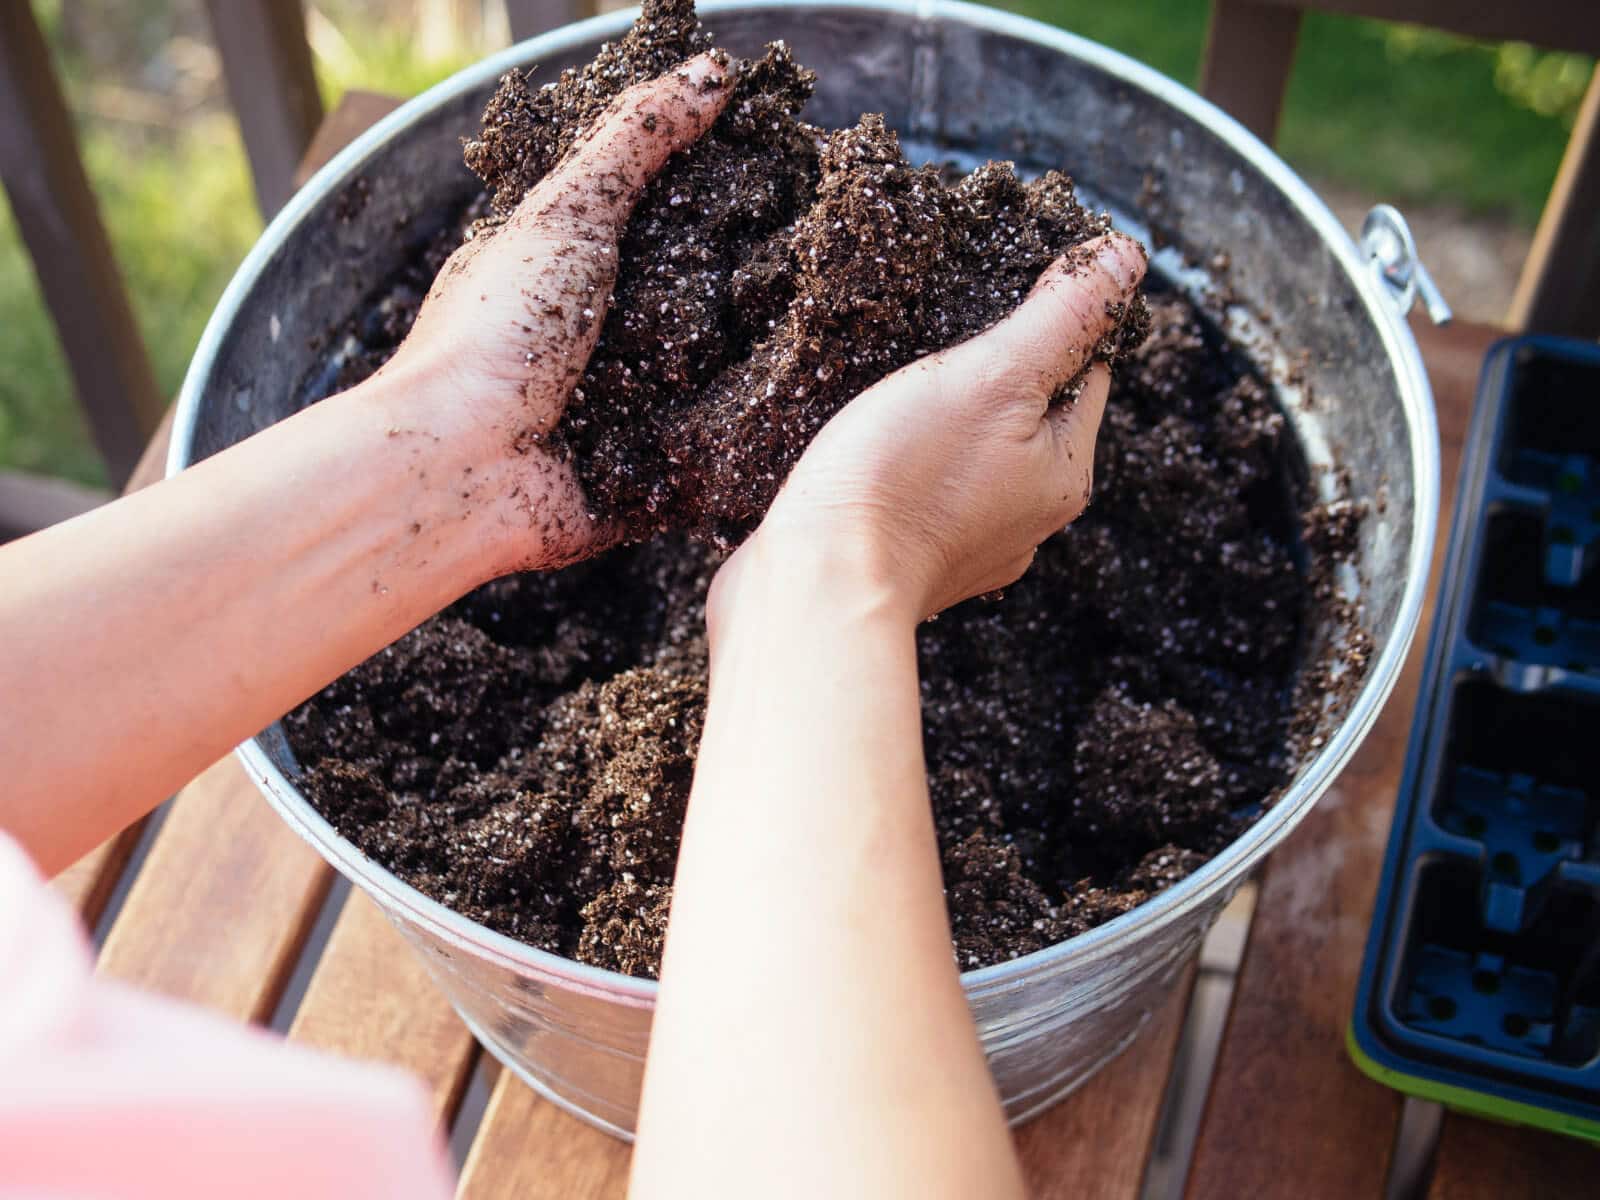 Peat moss: Good for plants but bad for the planet?